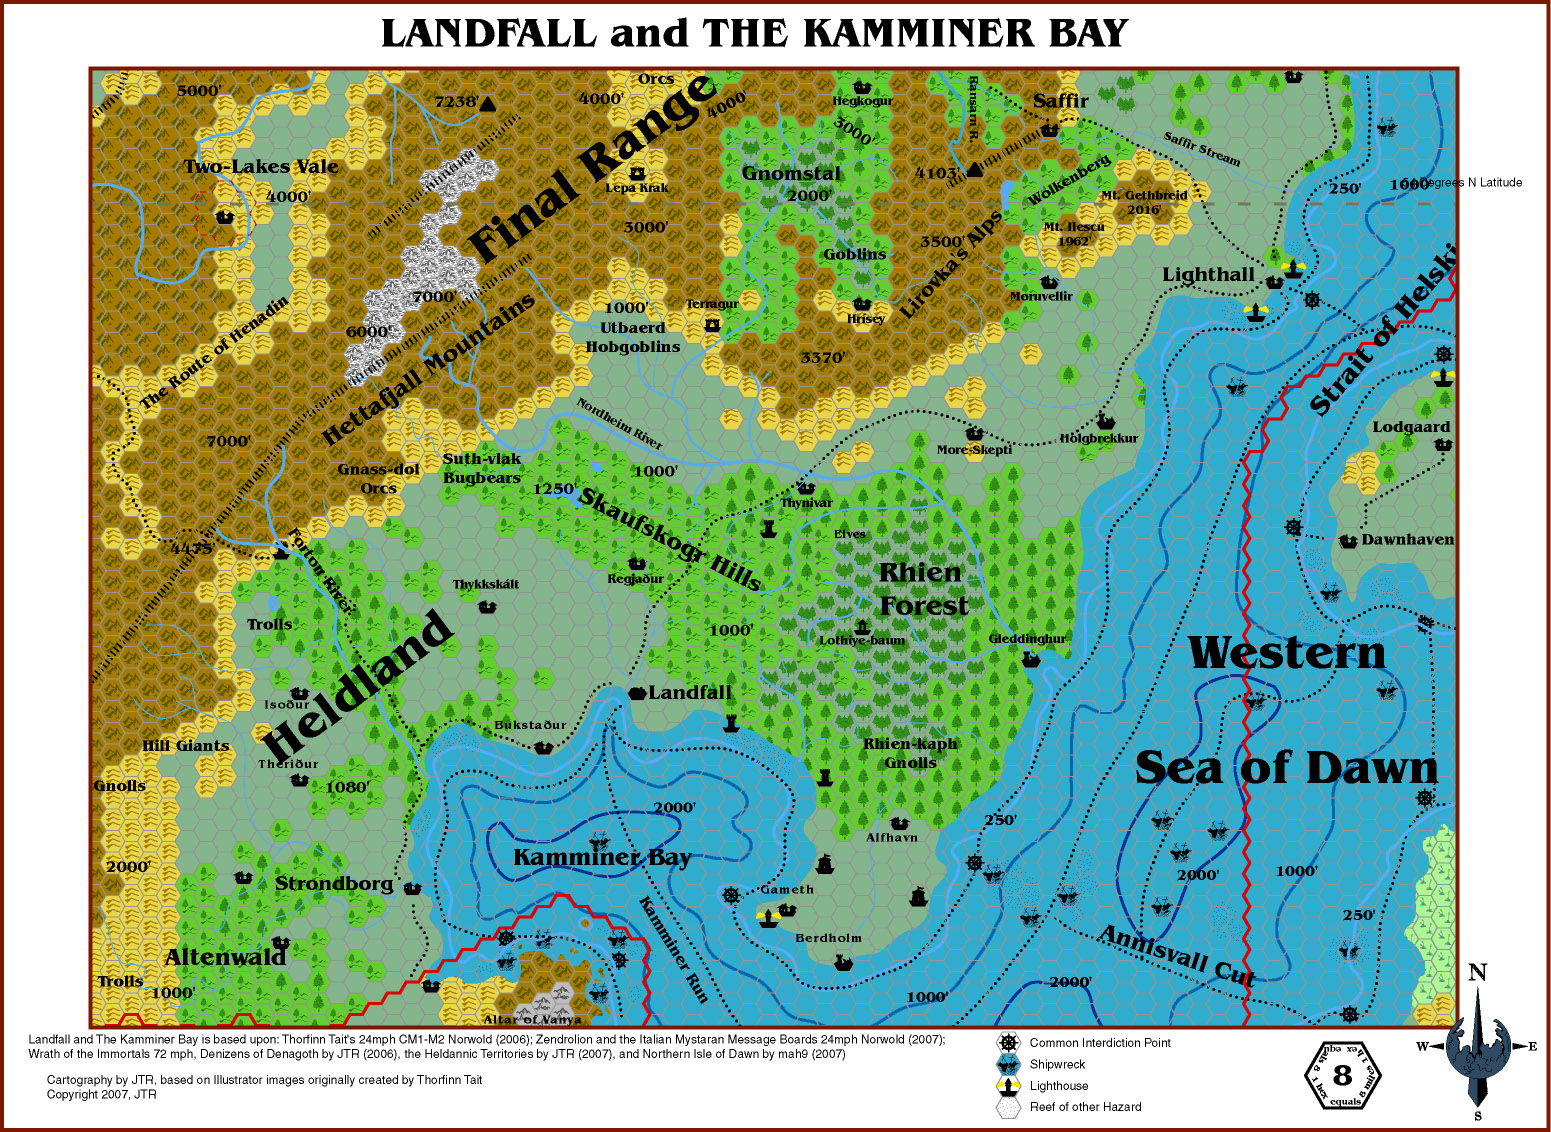 Landfall and the Kamminer Bay, 8 miles per hex by JTR, July 2007